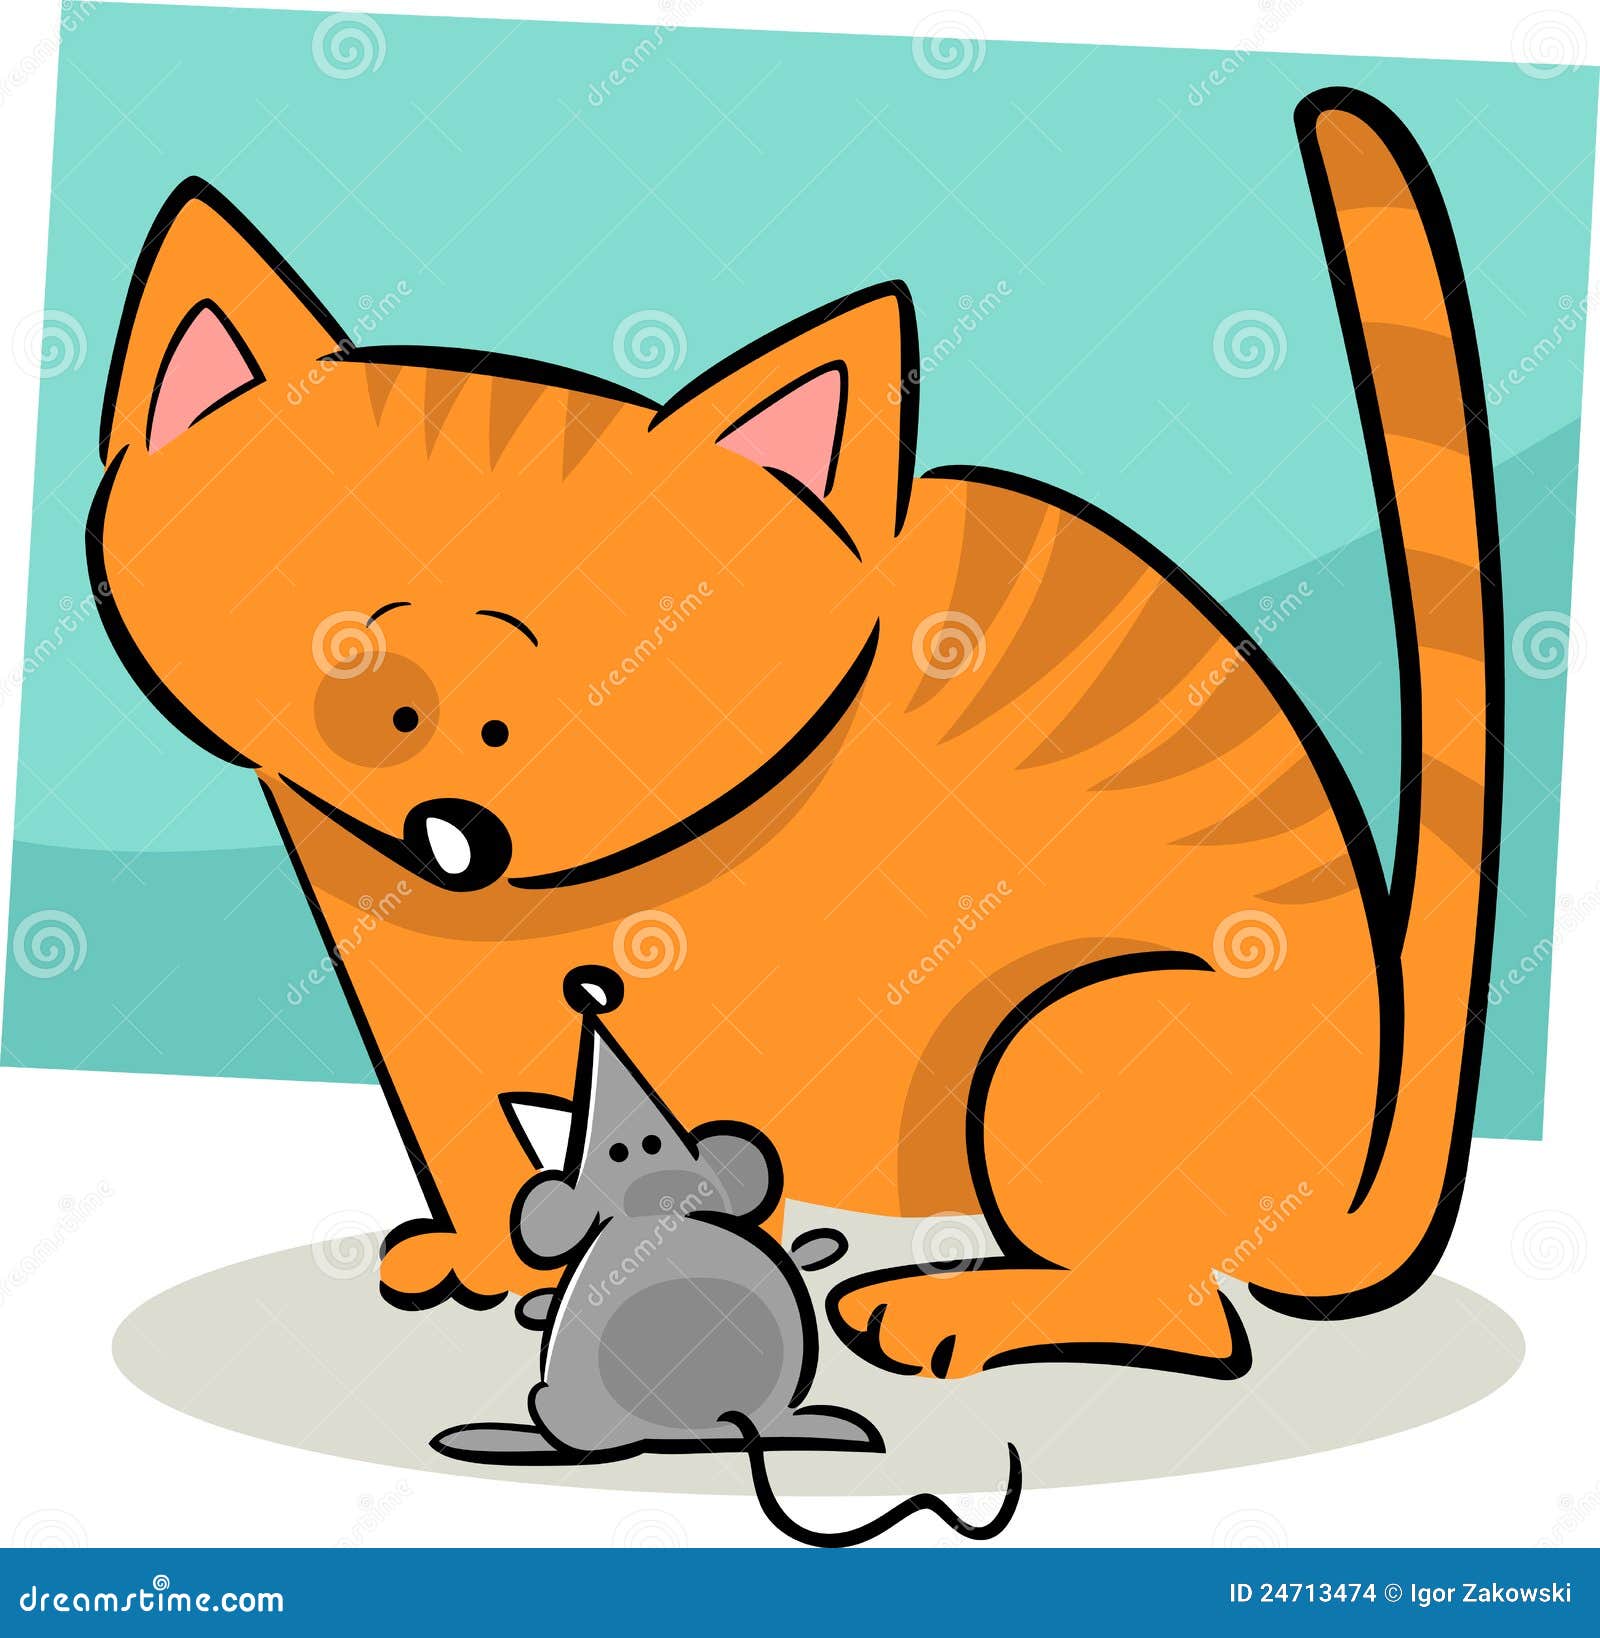 clipart cat and mouse - photo #36